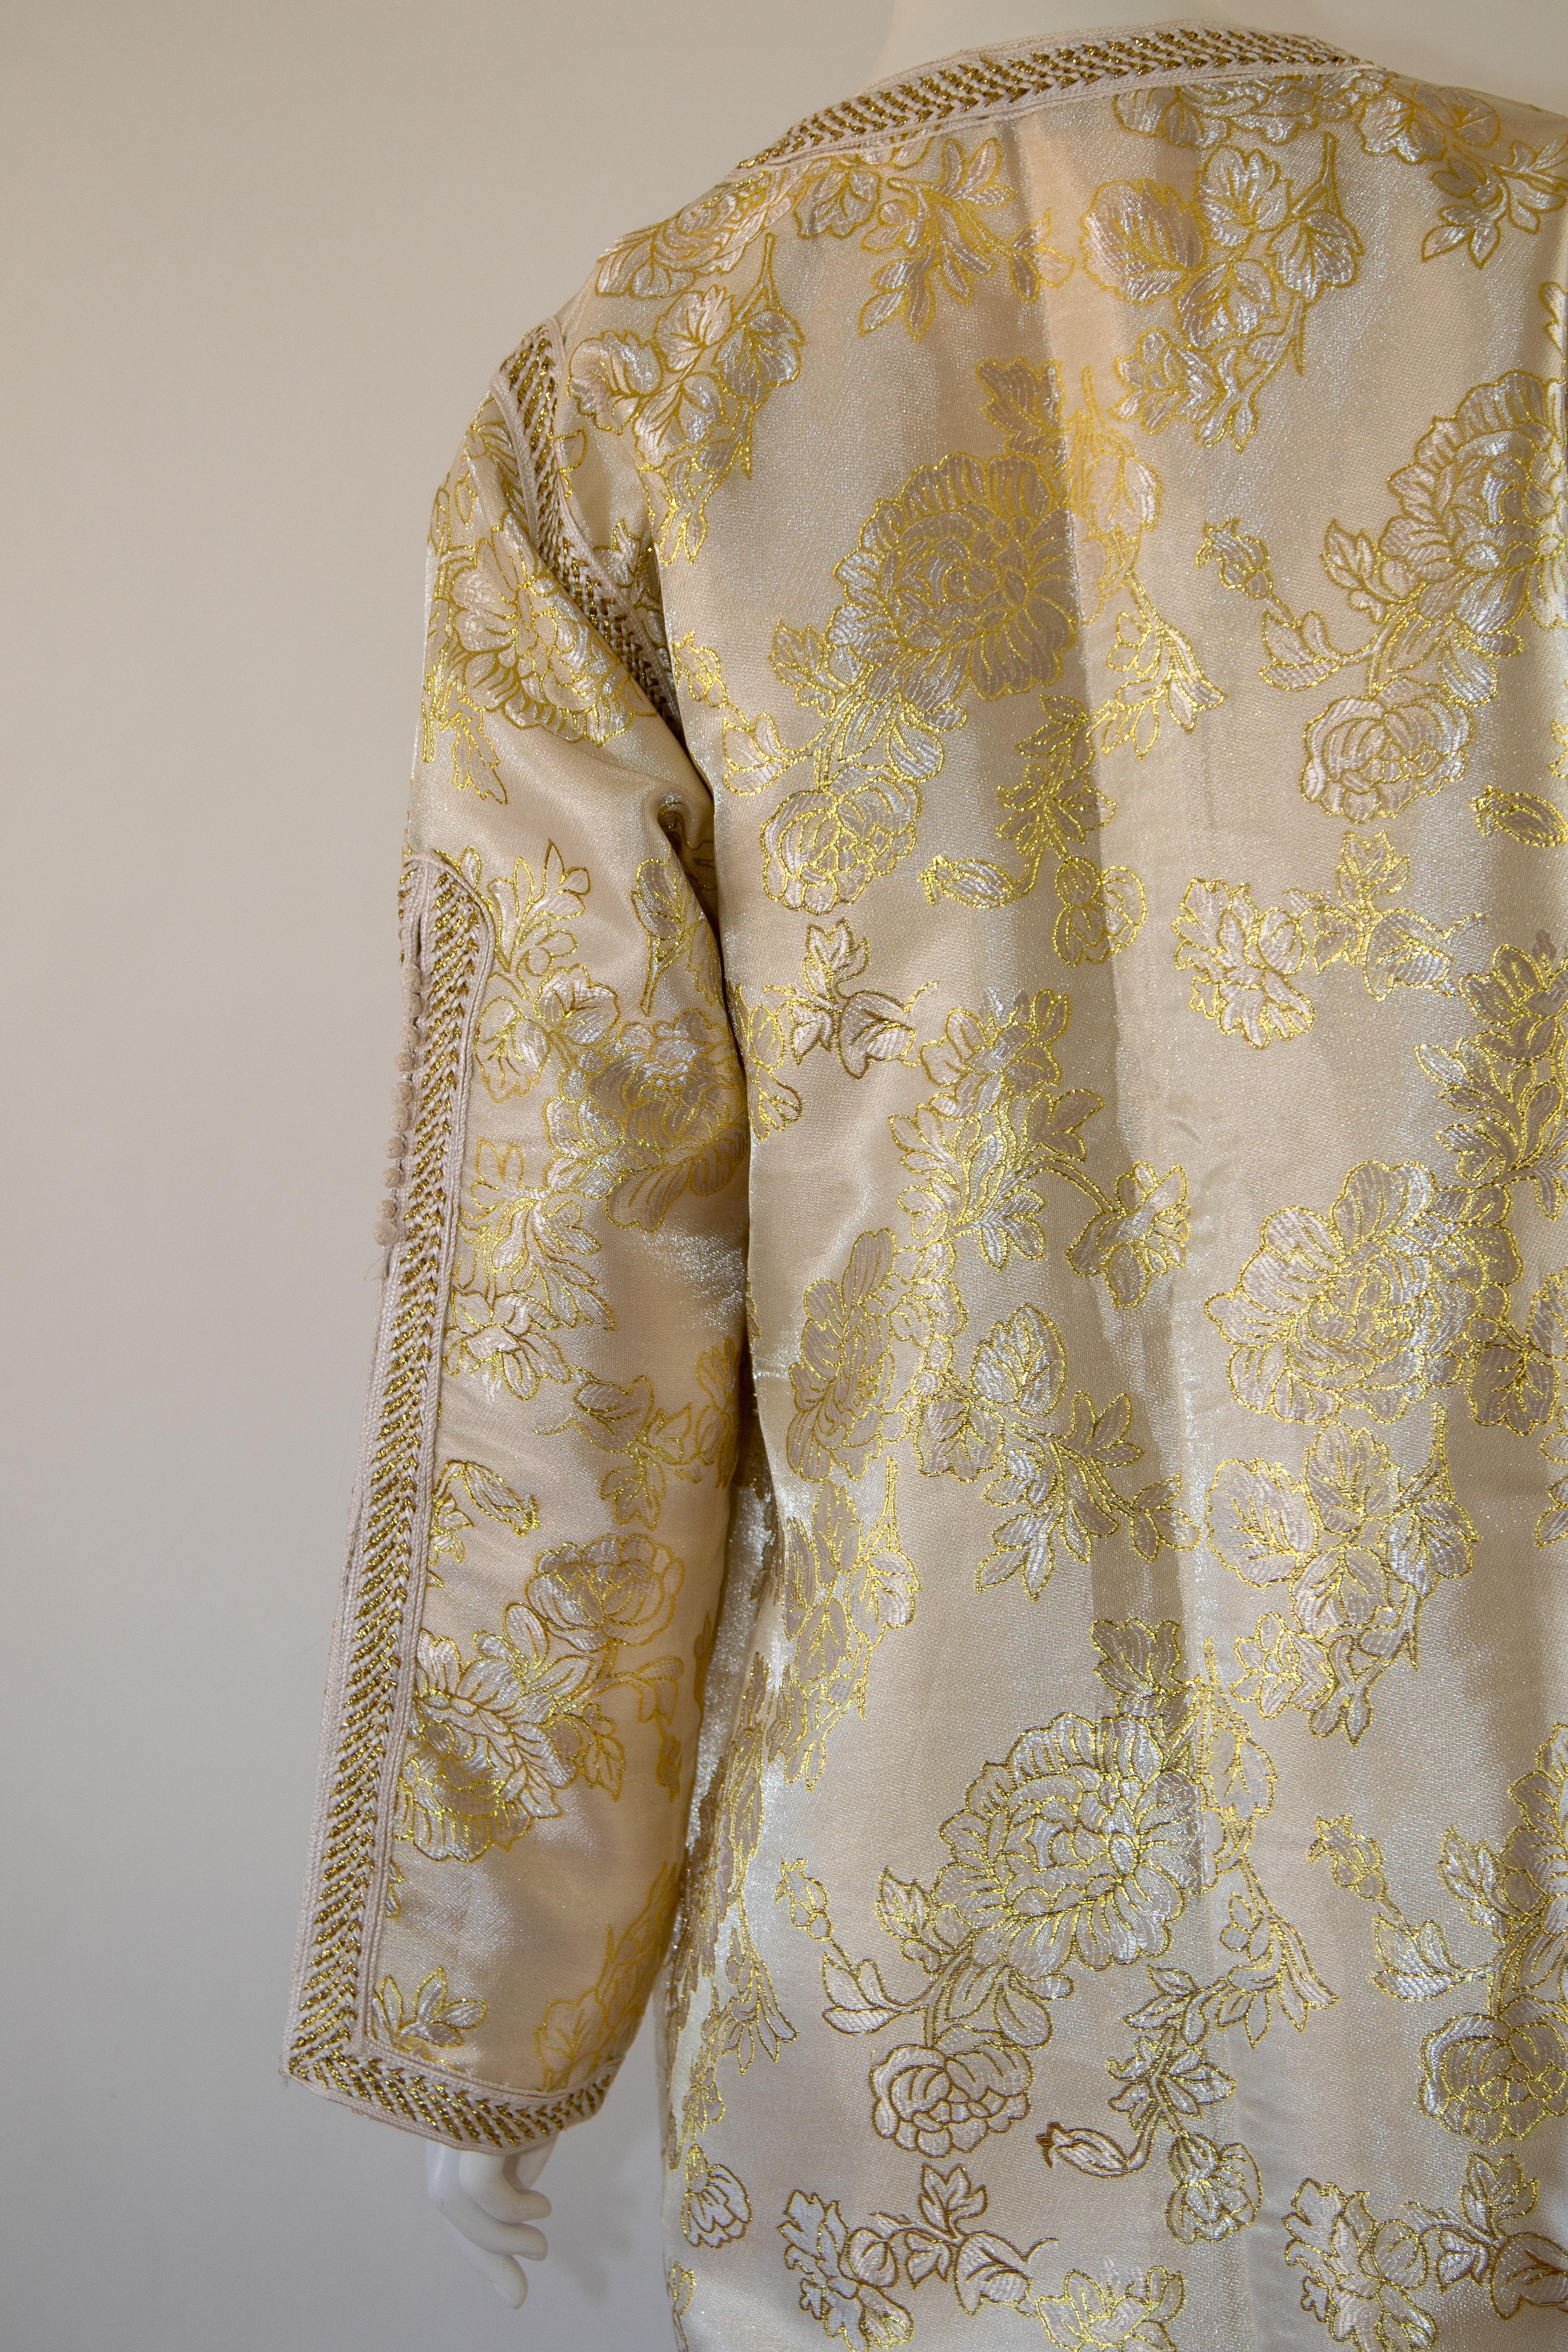 Vintage Moroccan Caftan in Gold Brocade Maxi Dress Kaftan Size L to XL For Sale 13